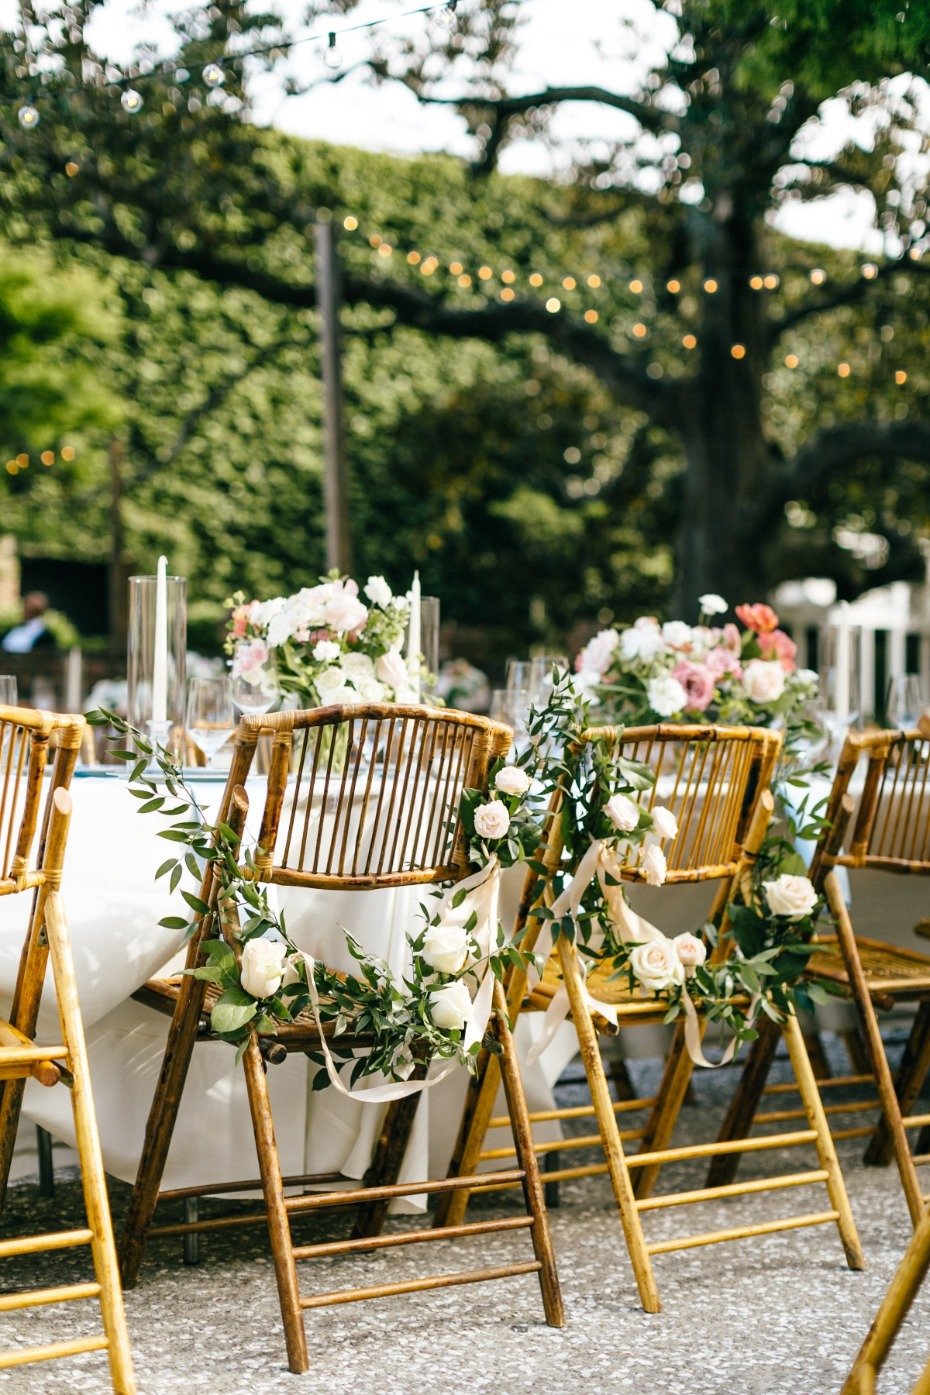 Wedding chairs covered in flowers